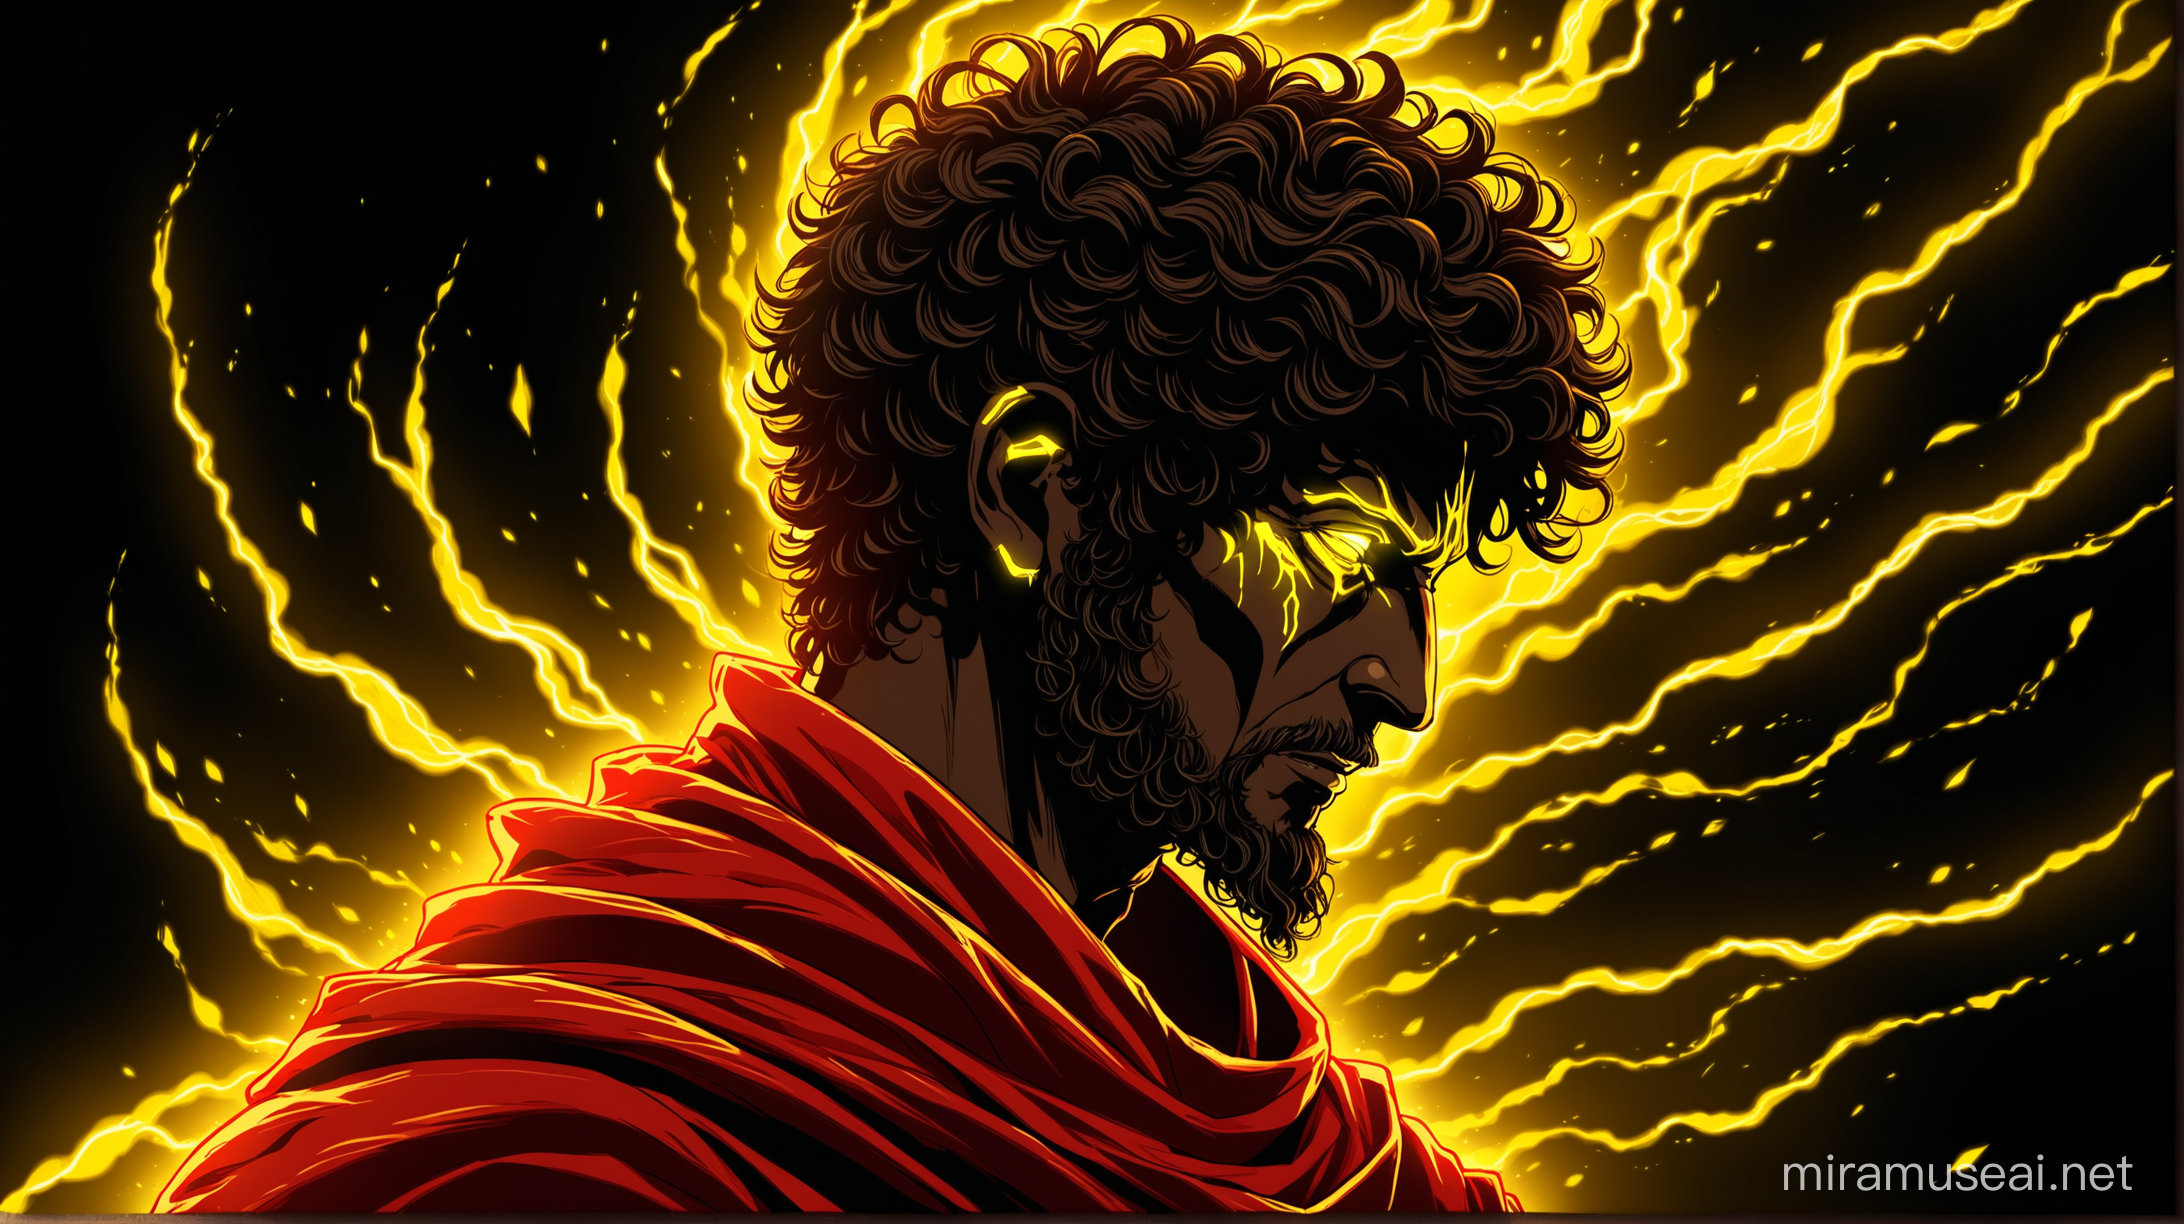 Neon YELLOW-RED Marcus Aurelius in a dark background with electifying yellow aura, Marcus Aurelius doesn;t have skin colors, There are many shadows on his face it's very detailed, he has red cloak and is faced side view